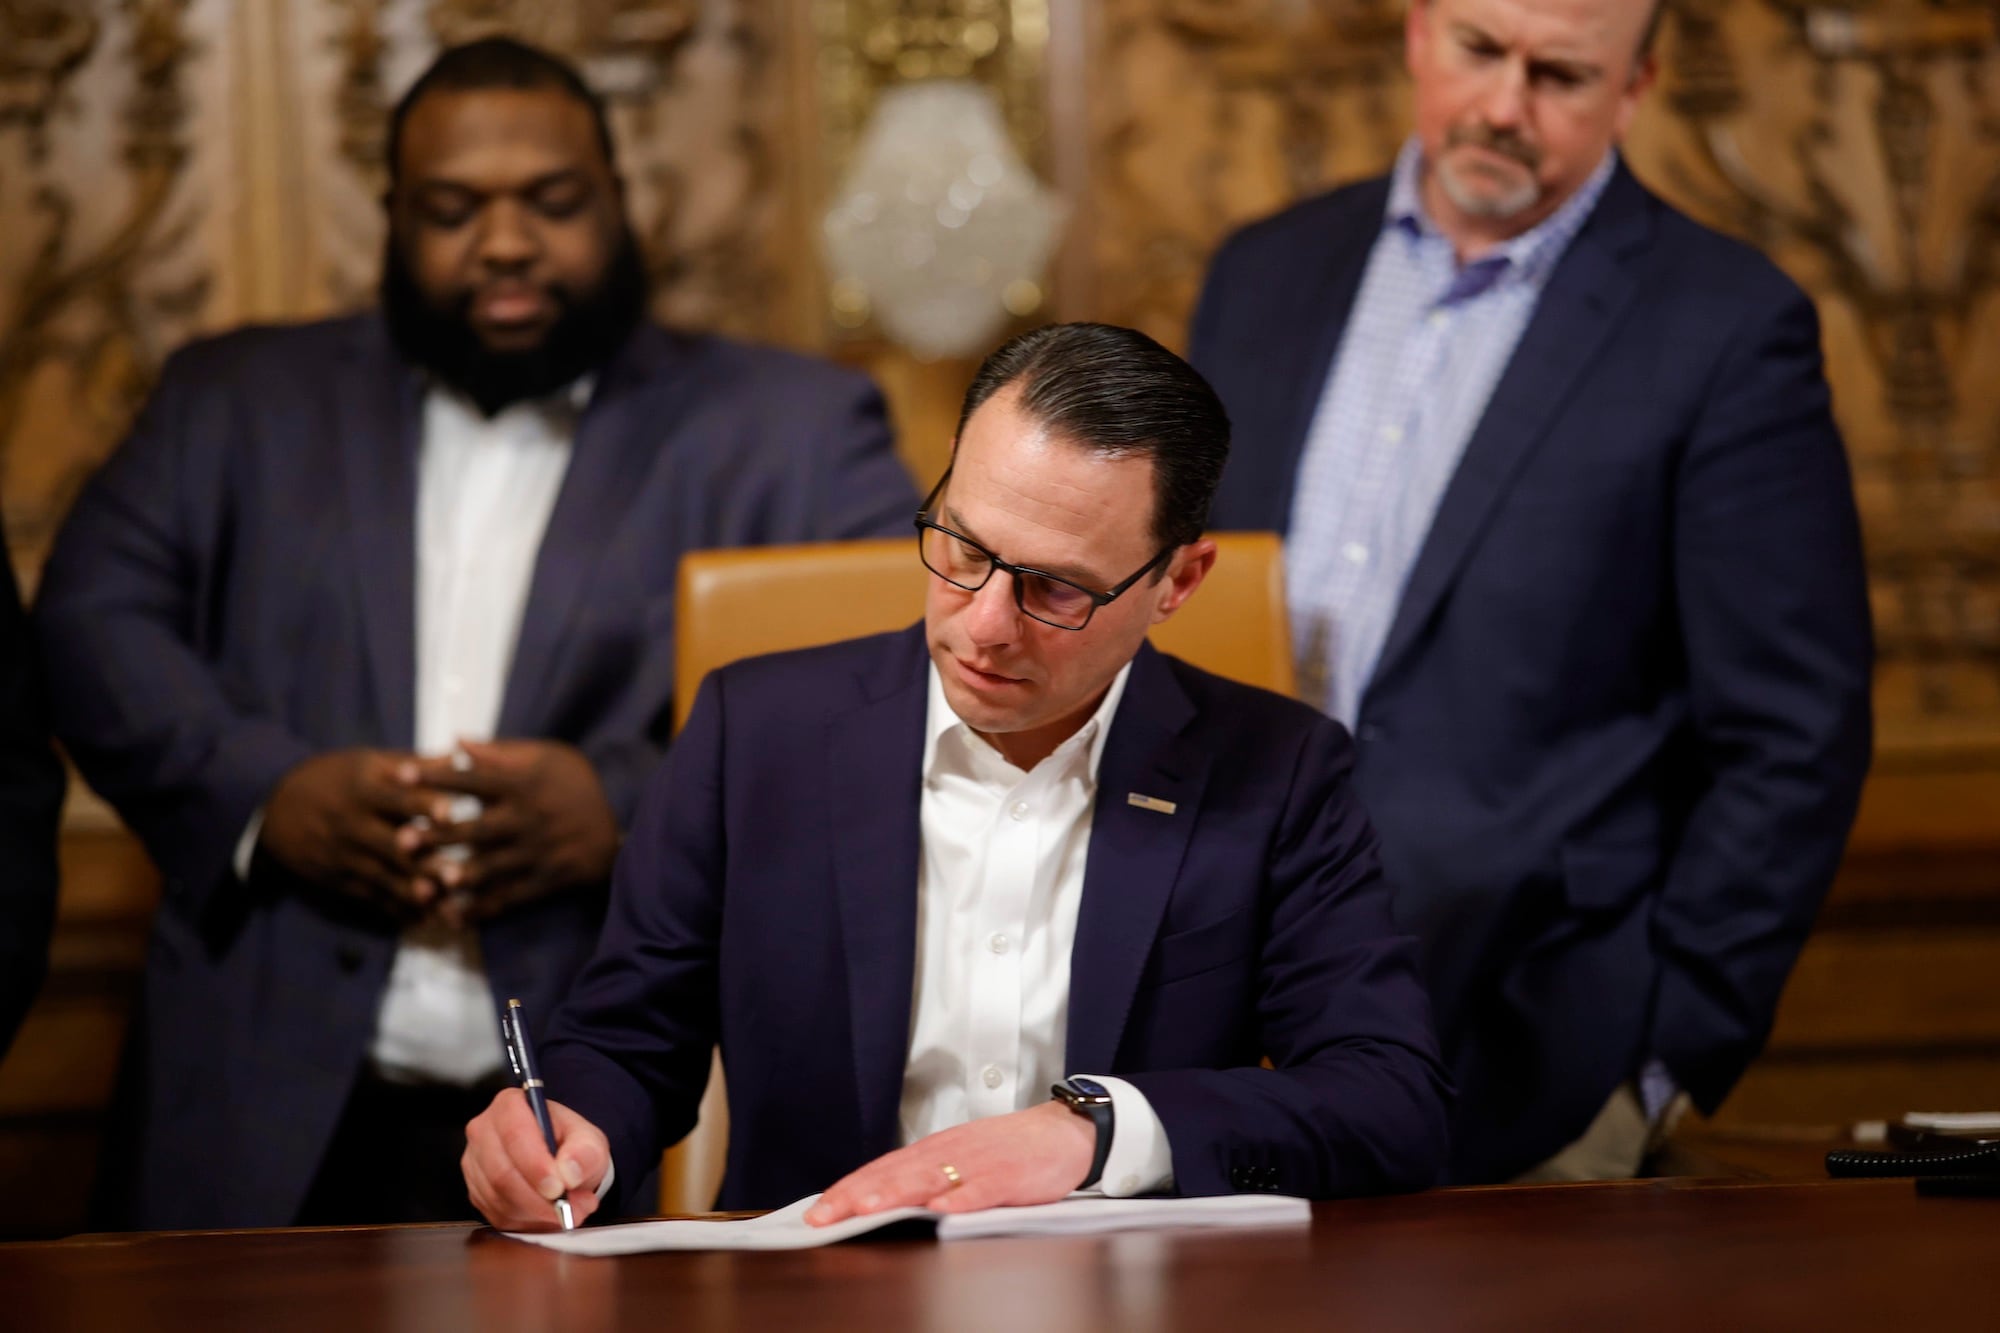 A man wearing a suit sits at a wooden table signing a piece of paper while two men in suits stand behind.